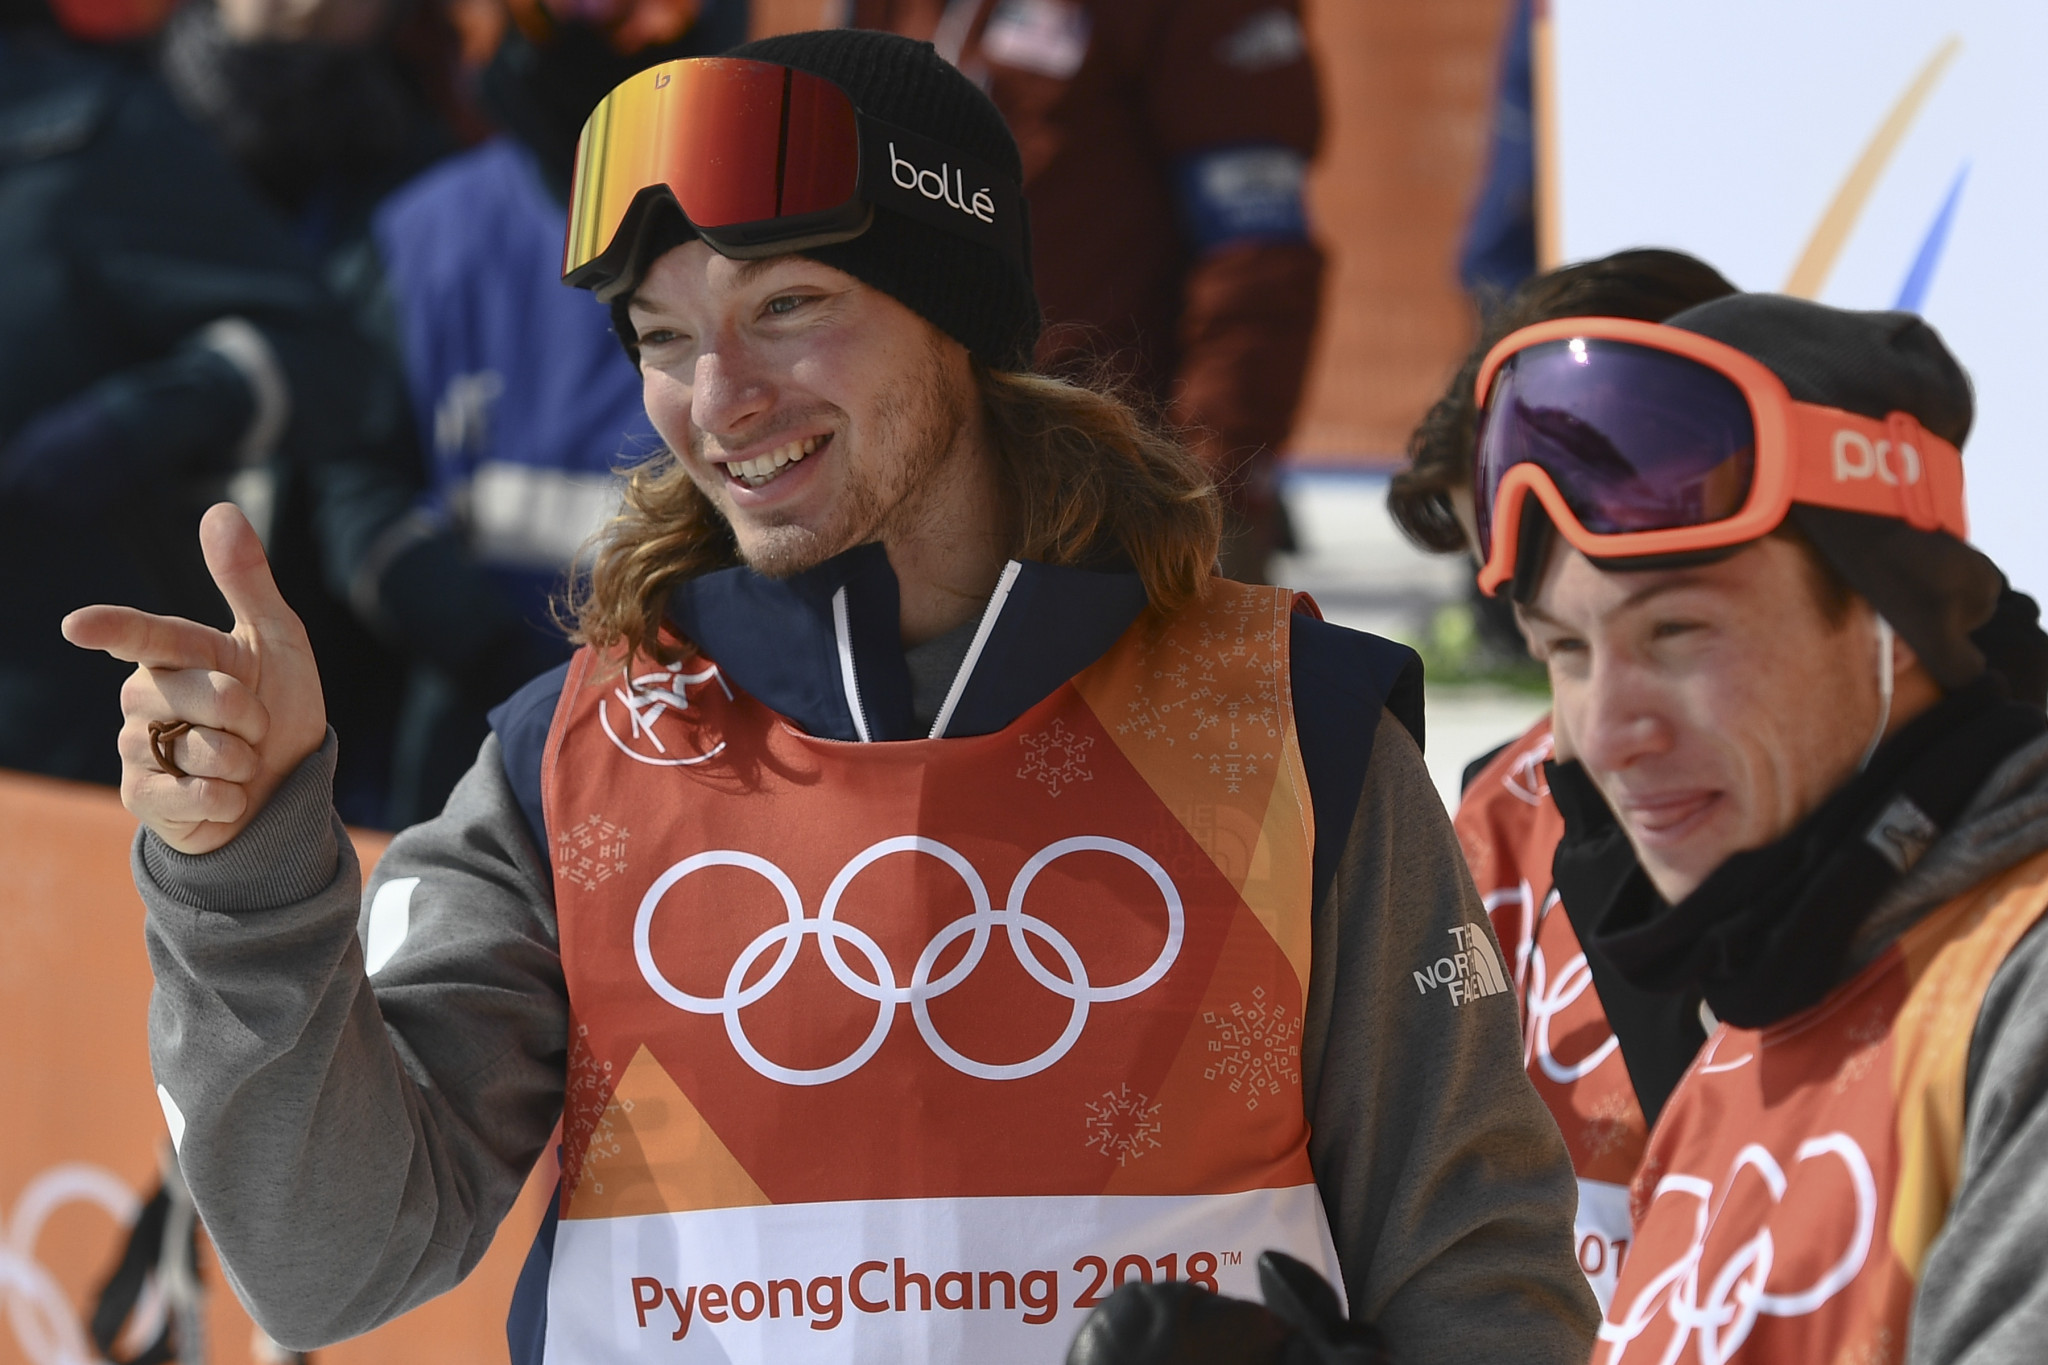 The United States’ David Wise produced a stunning final run to successfully defend his Olympic halfpipe title at Pyeongchang 2018 ©Getty Images